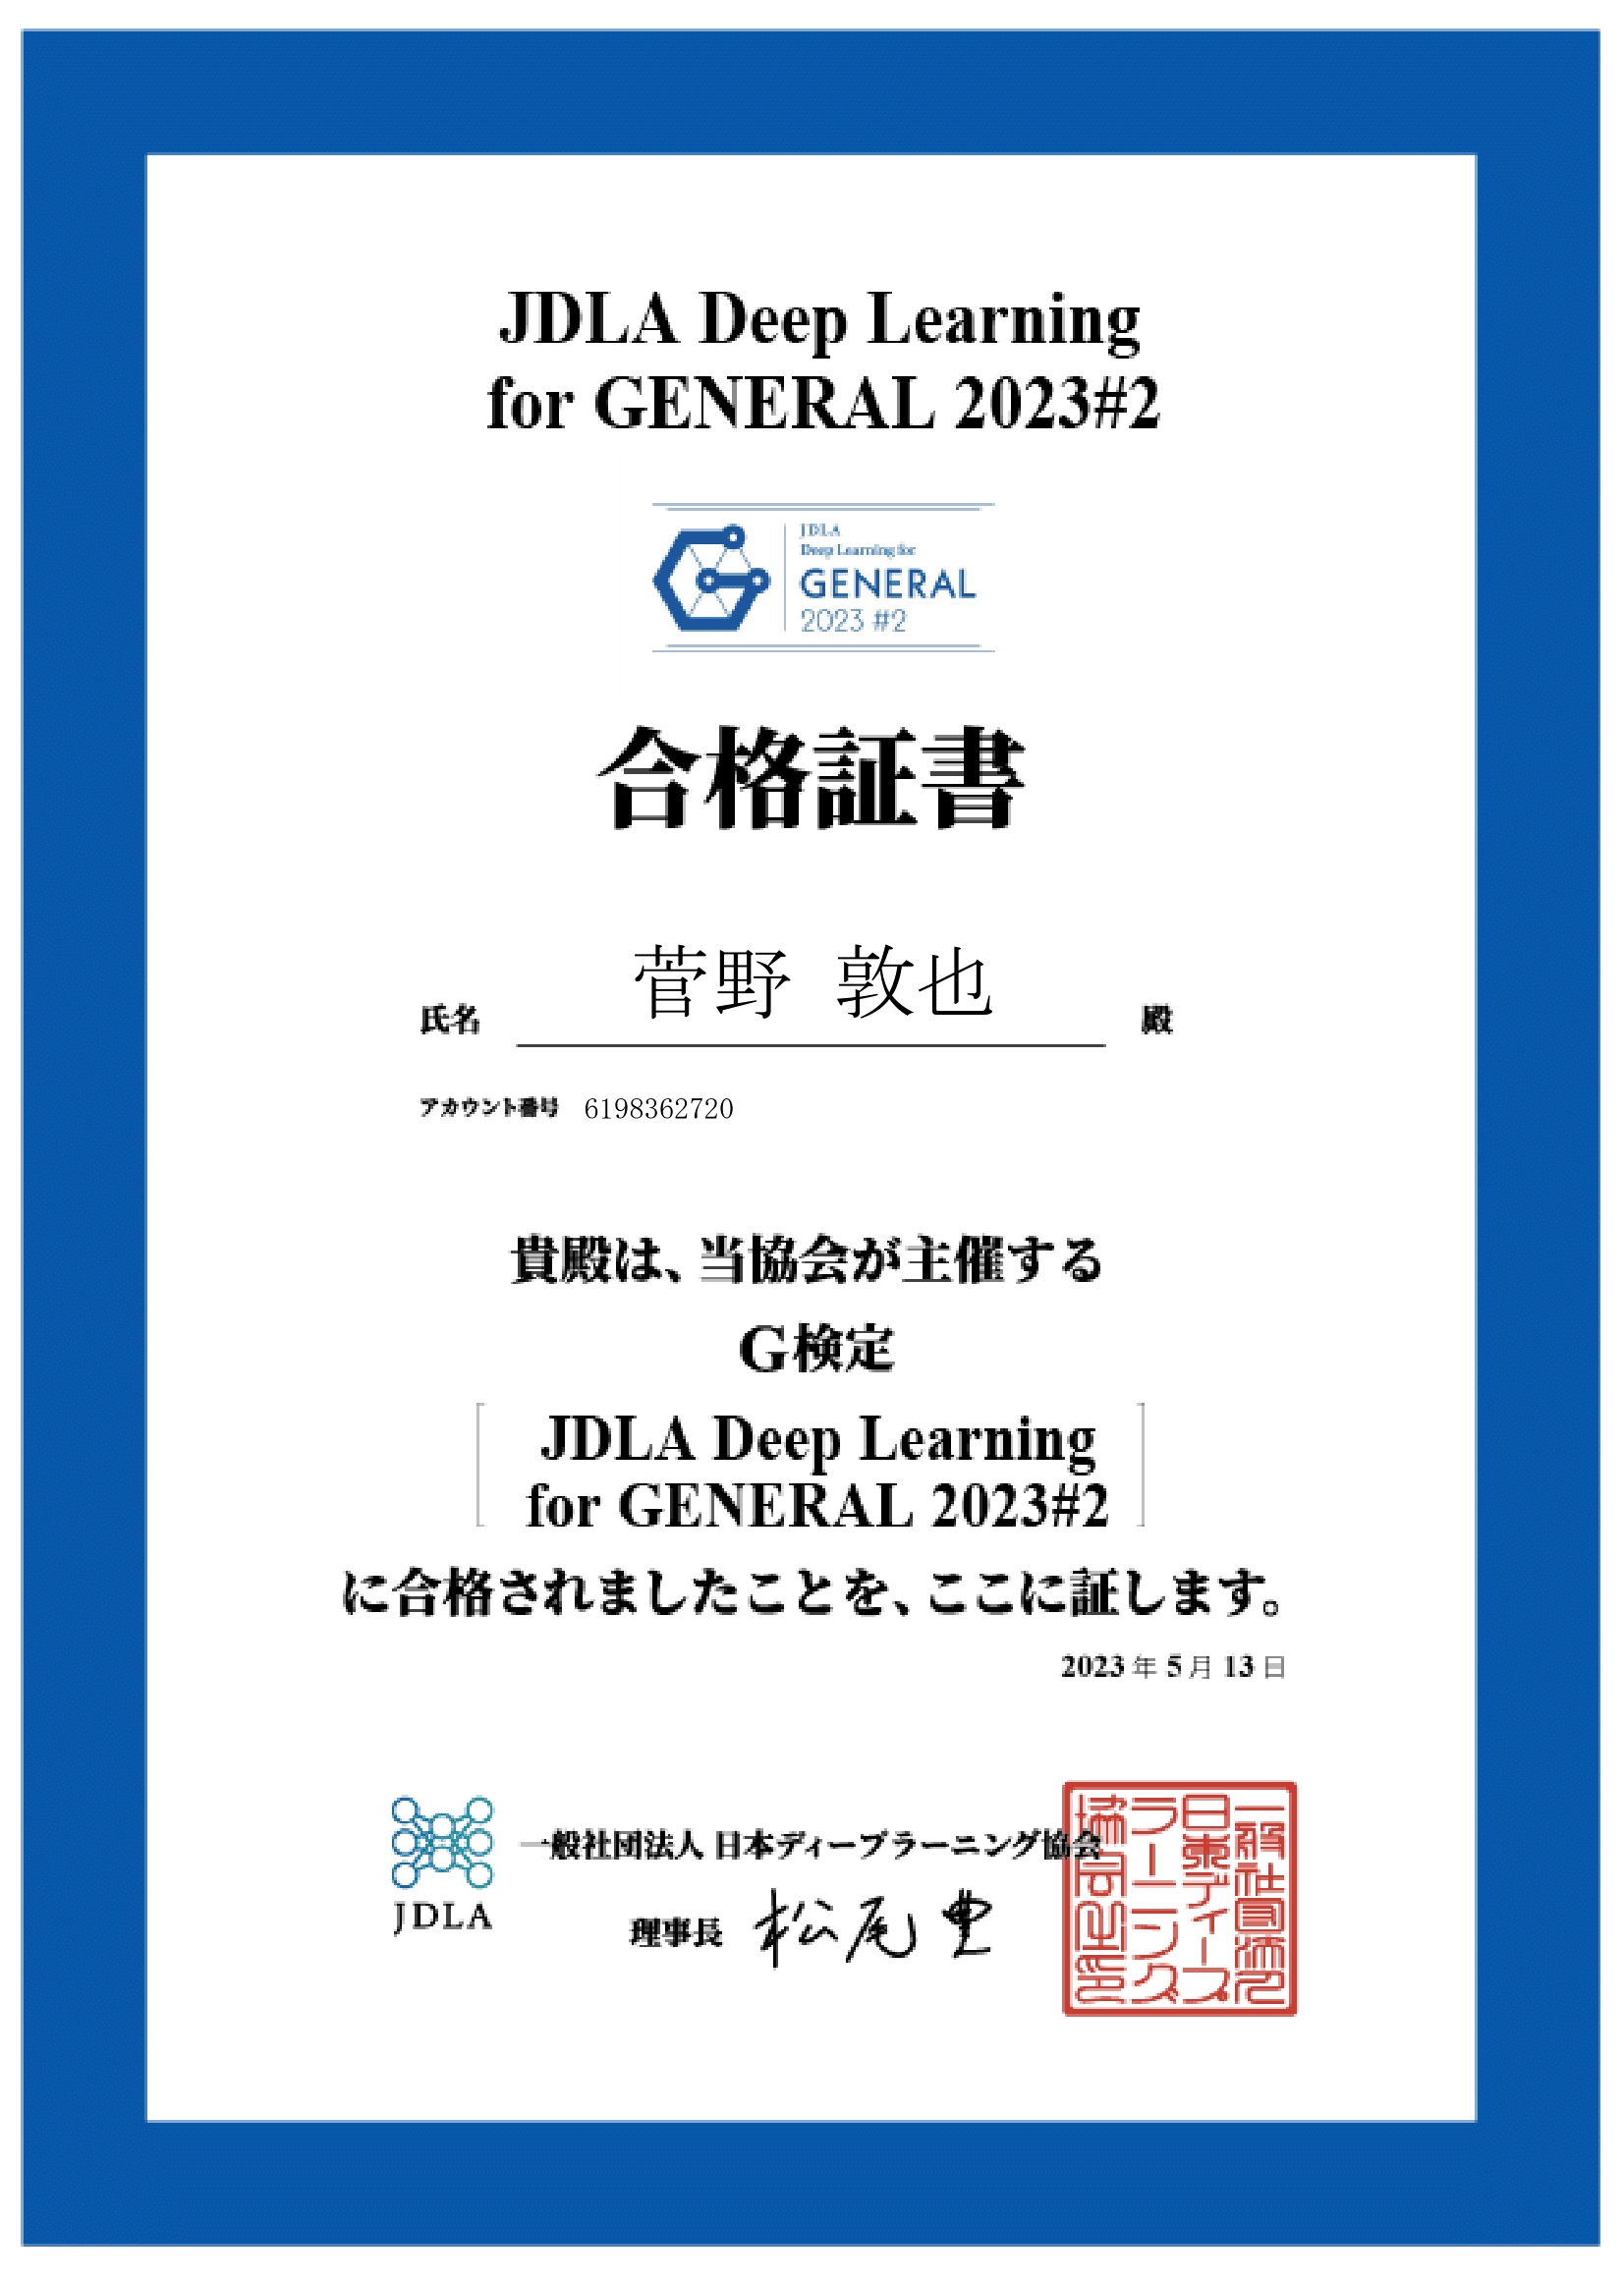 JDLA Deep Learning for GENERAL 2023 #2 検定 合格証書